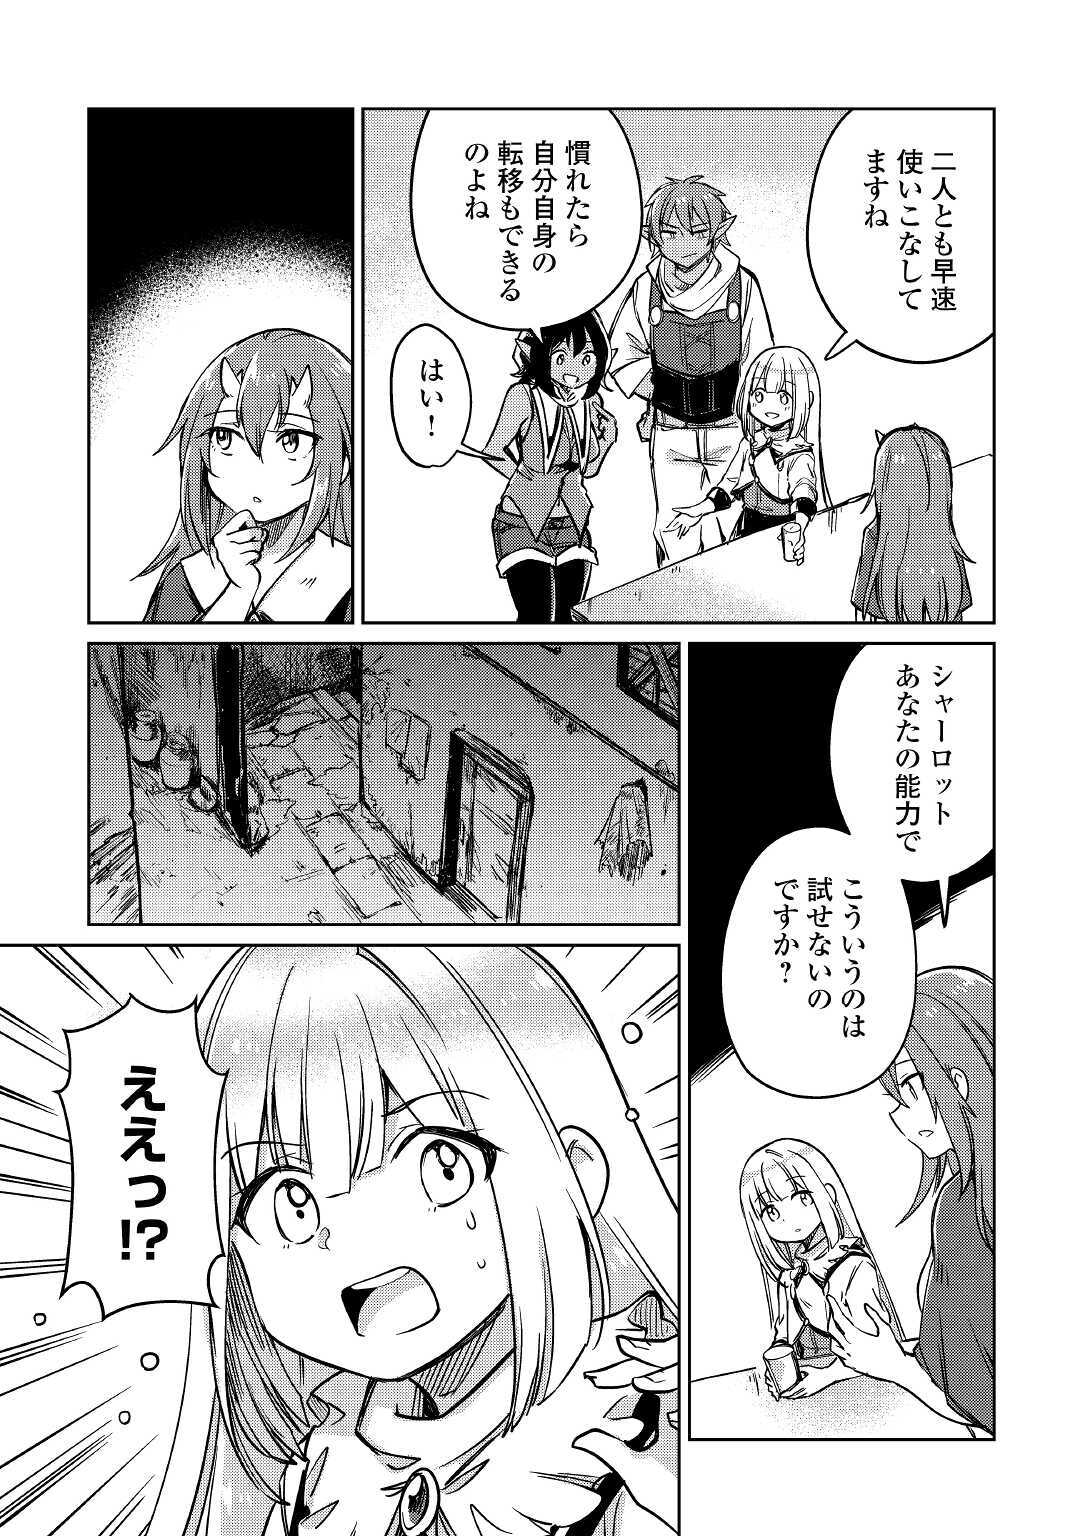 The Former Structural Researcher’s Story of Otherworldly Adventure 第26話 - Page 11